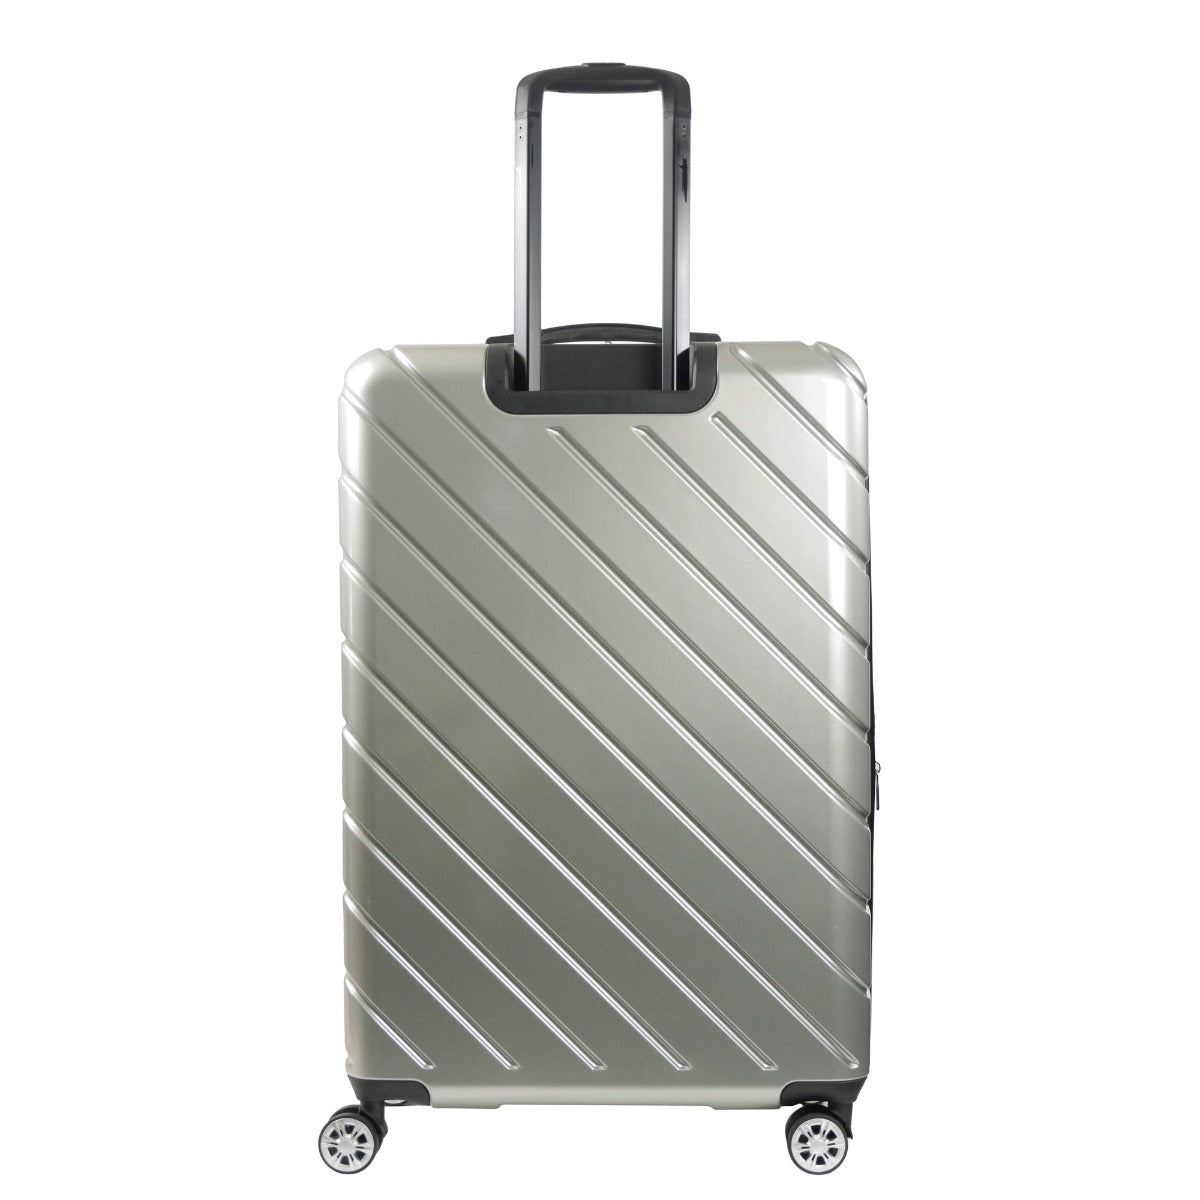 Velocity 31" Hardside Spinner Checked Luggage Suitcase Silver